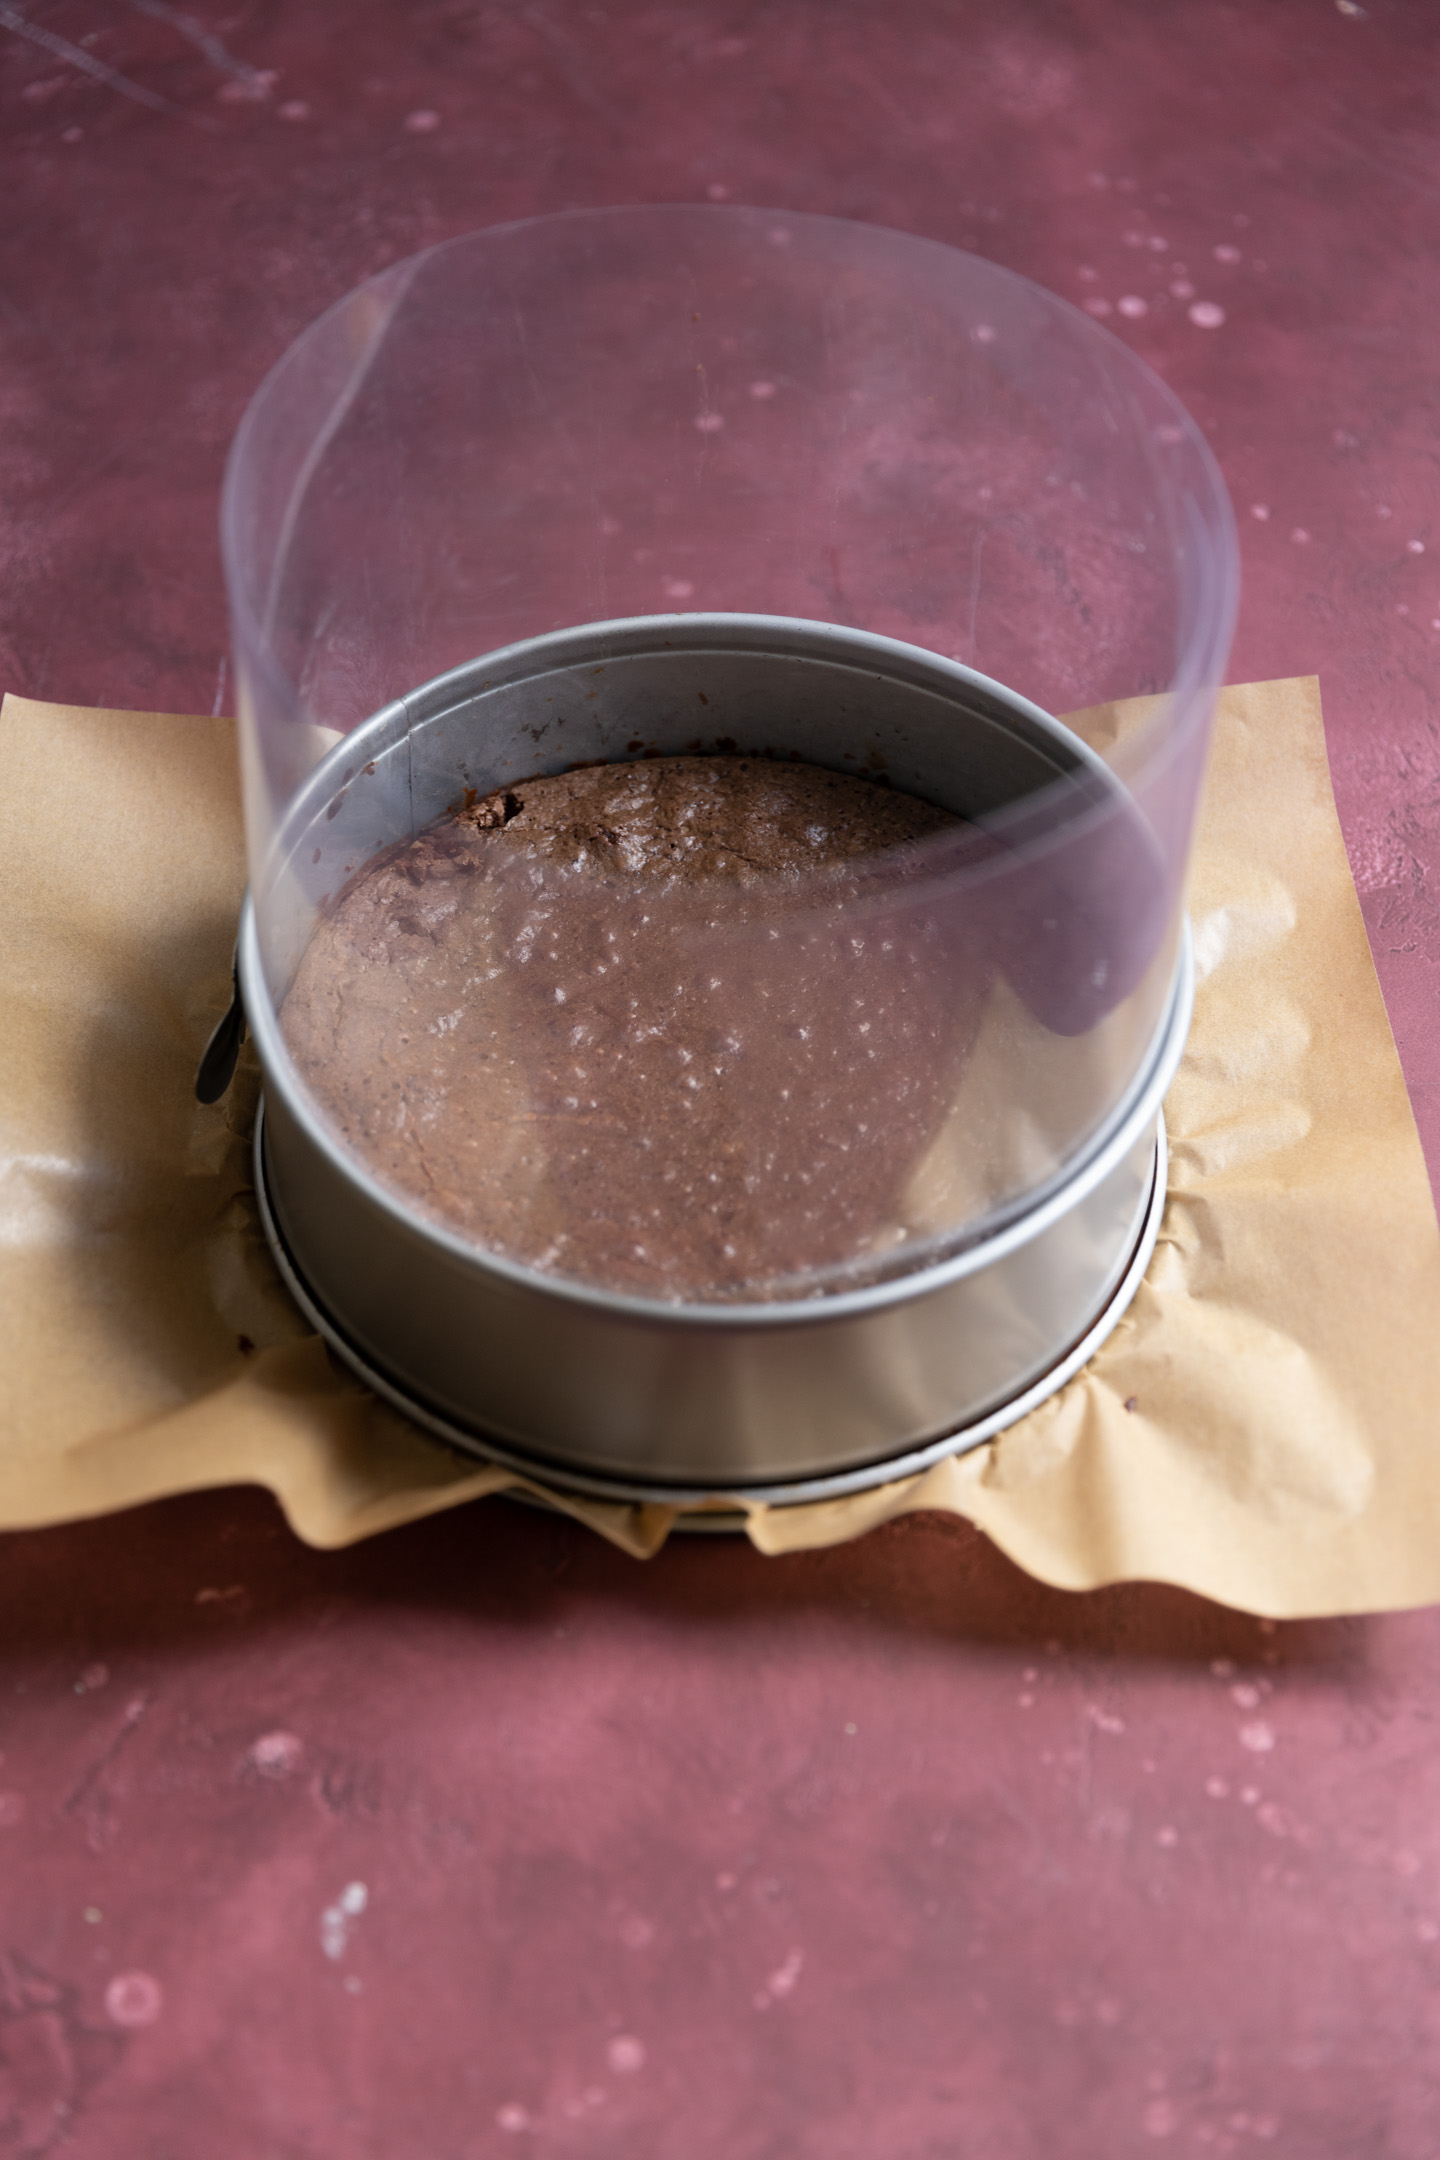 An acetate liner around a chocolate cake in a springform pan.